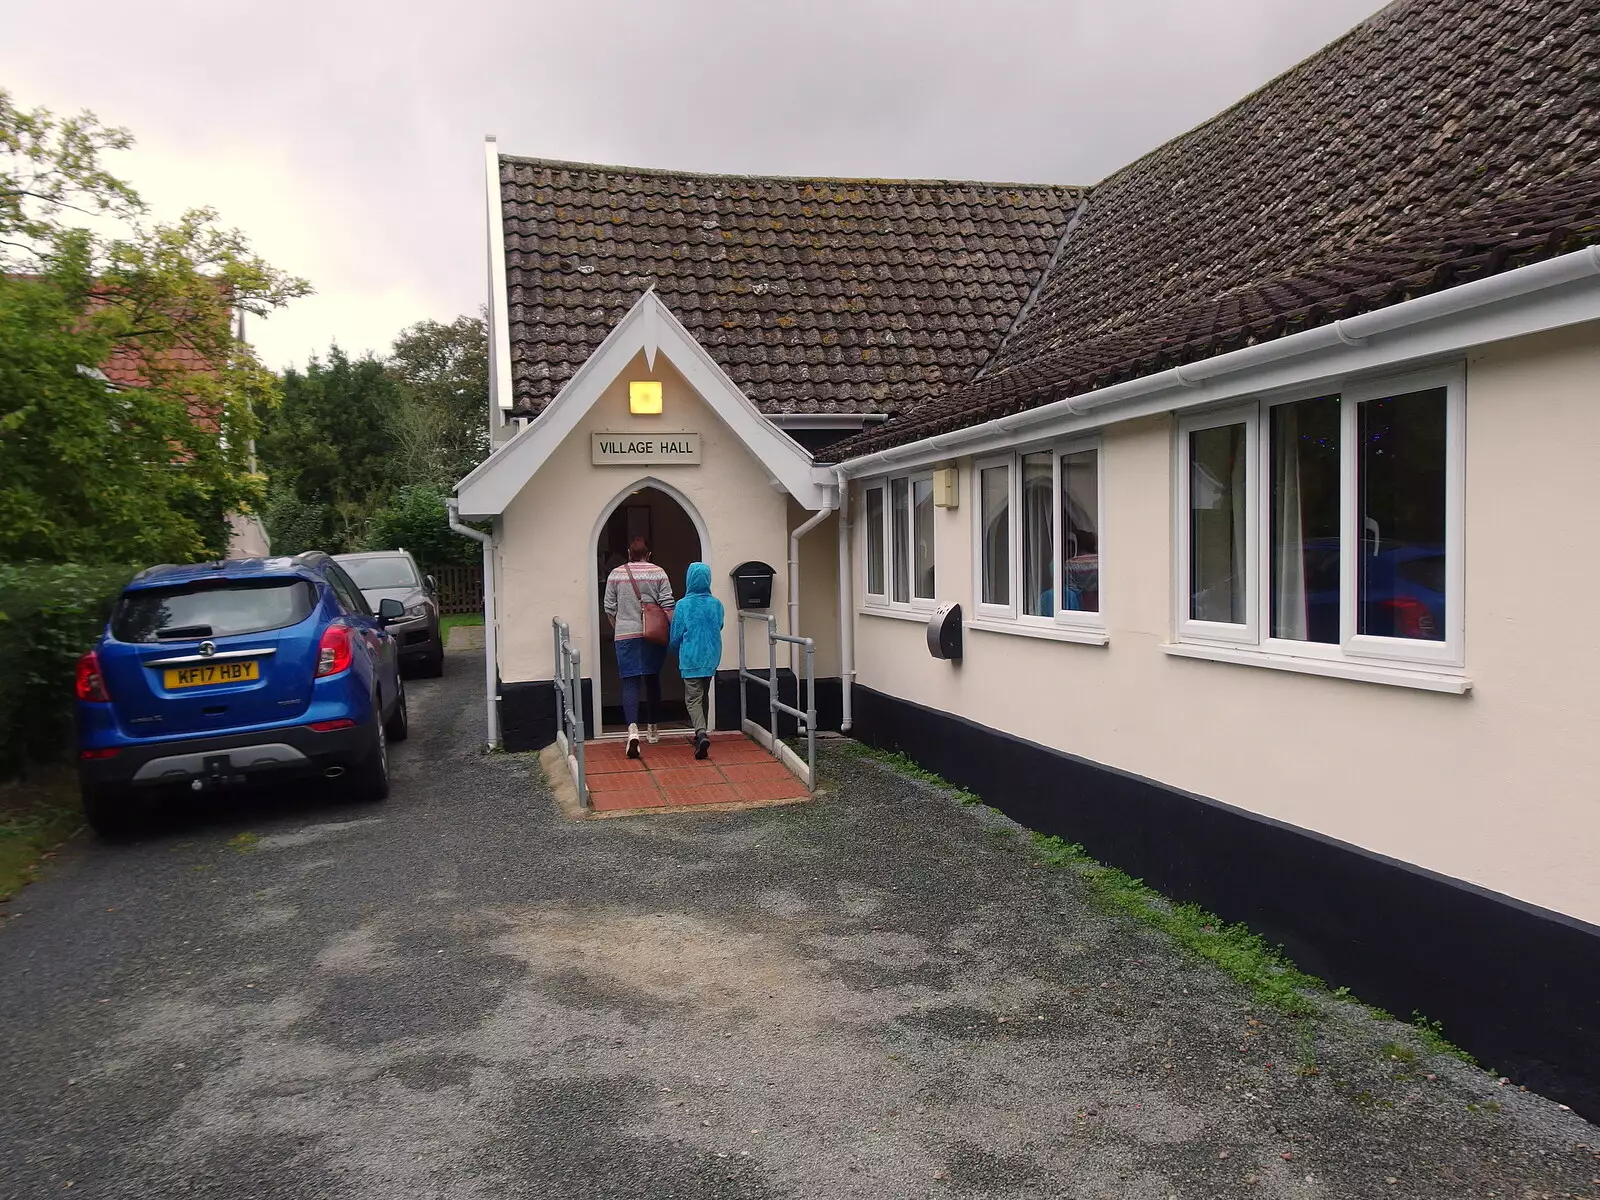 Isobel and Harry enter the village hall, from Sunday Lunch at the Village Hall, Brome, Suffolk - 10th October 2021